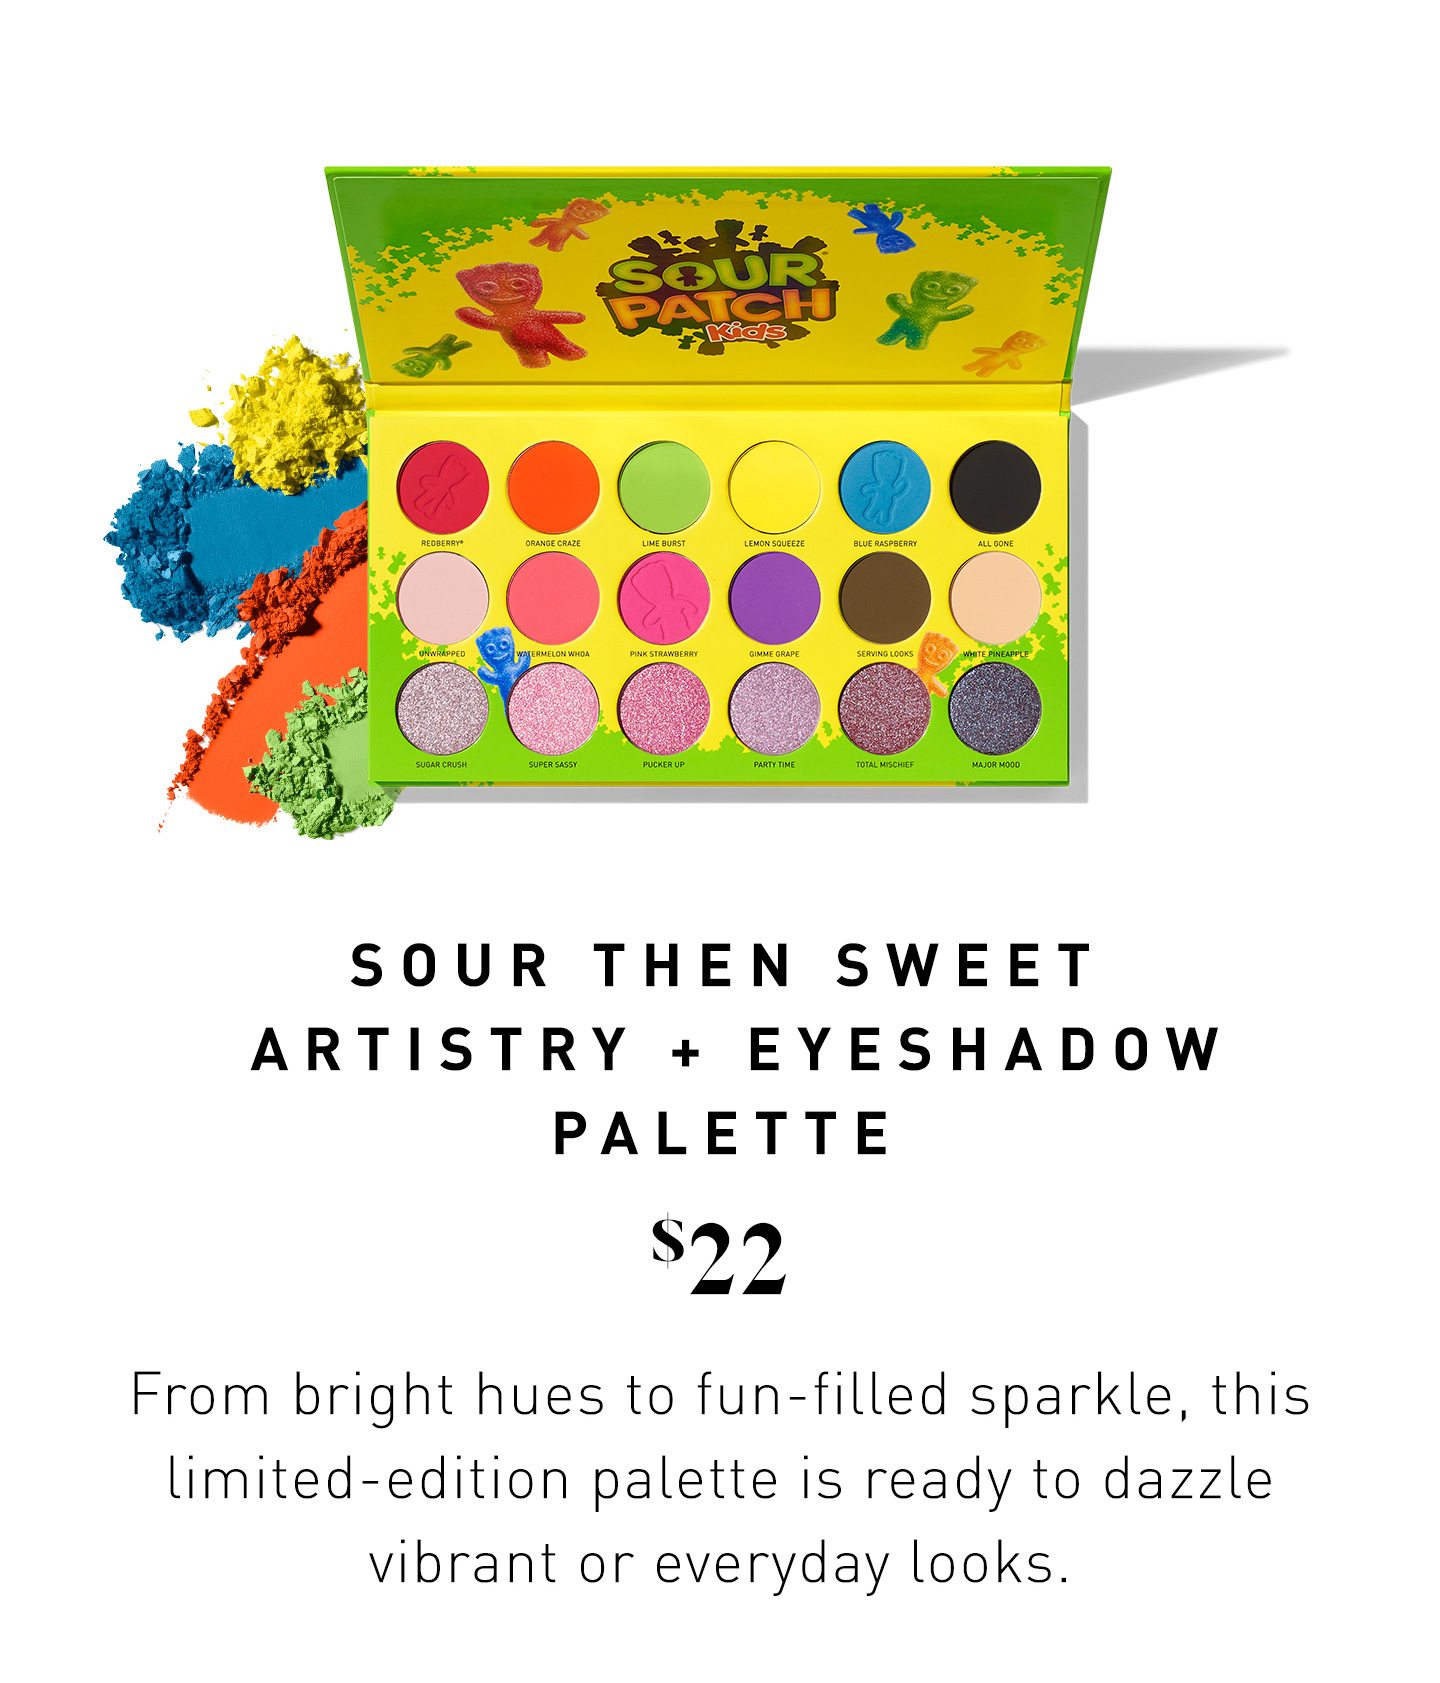 SOUR THEN SWEET® 18-PAN ARTISTRY PALETTE $22 From bright hues to fun-filled sparkle, this limited-edition palette is ready to dazzle vibrant or everyday looks.